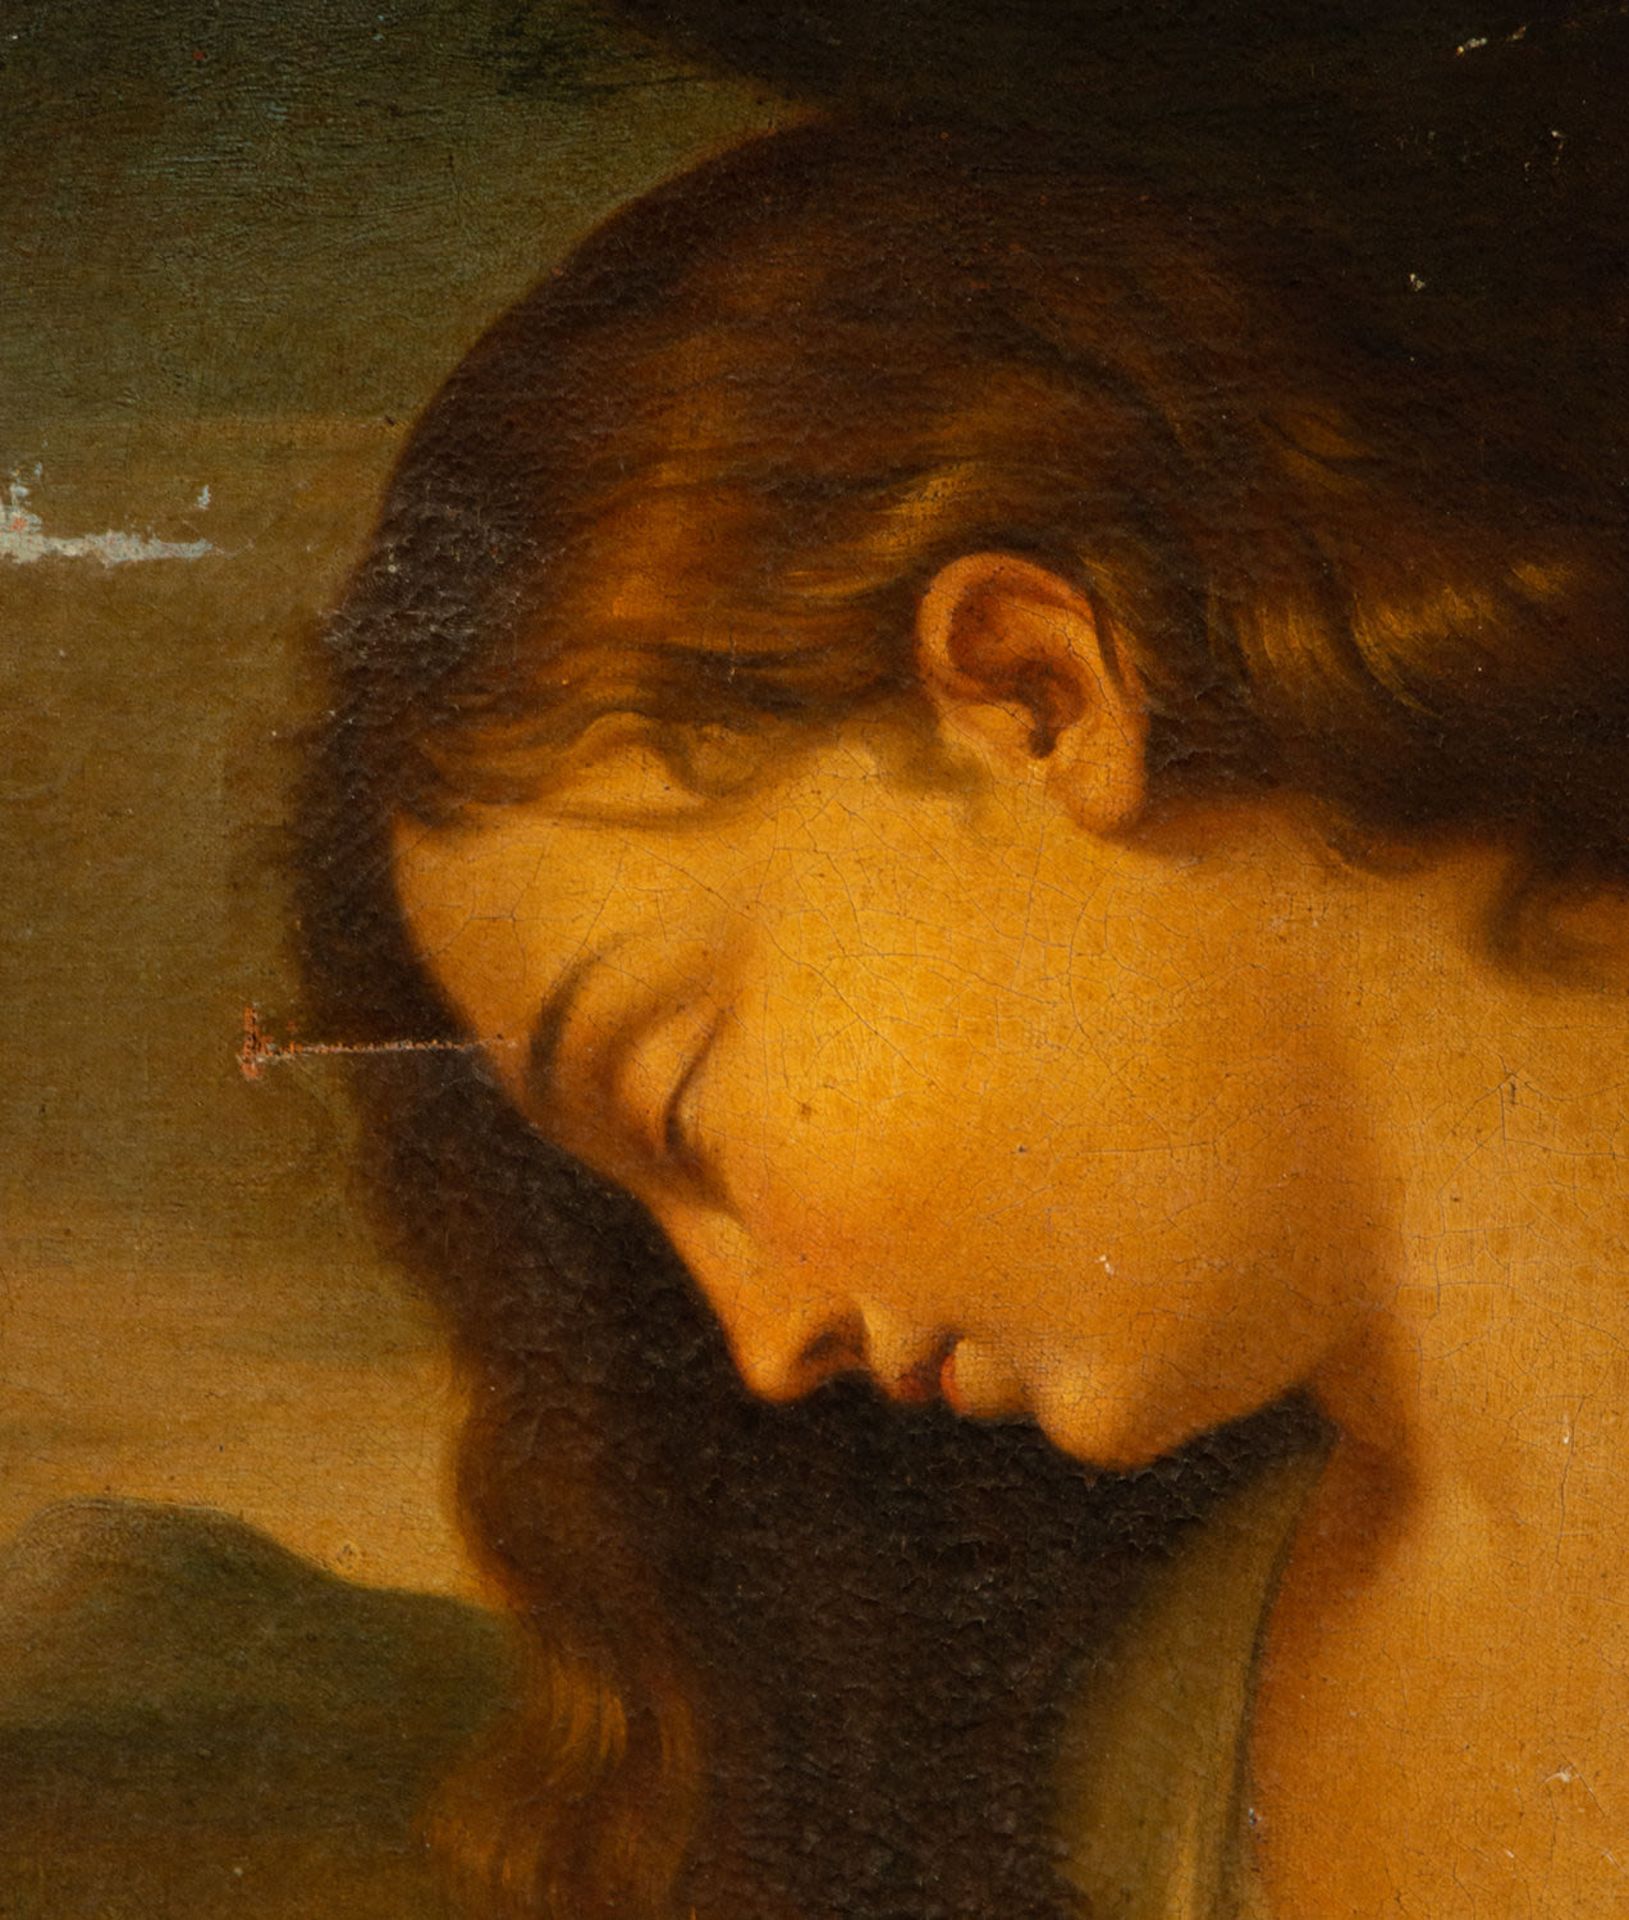 Penitent Magdalen, according to models by Mateo Cerezo, Spanish school of the 18th century - Image 2 of 4